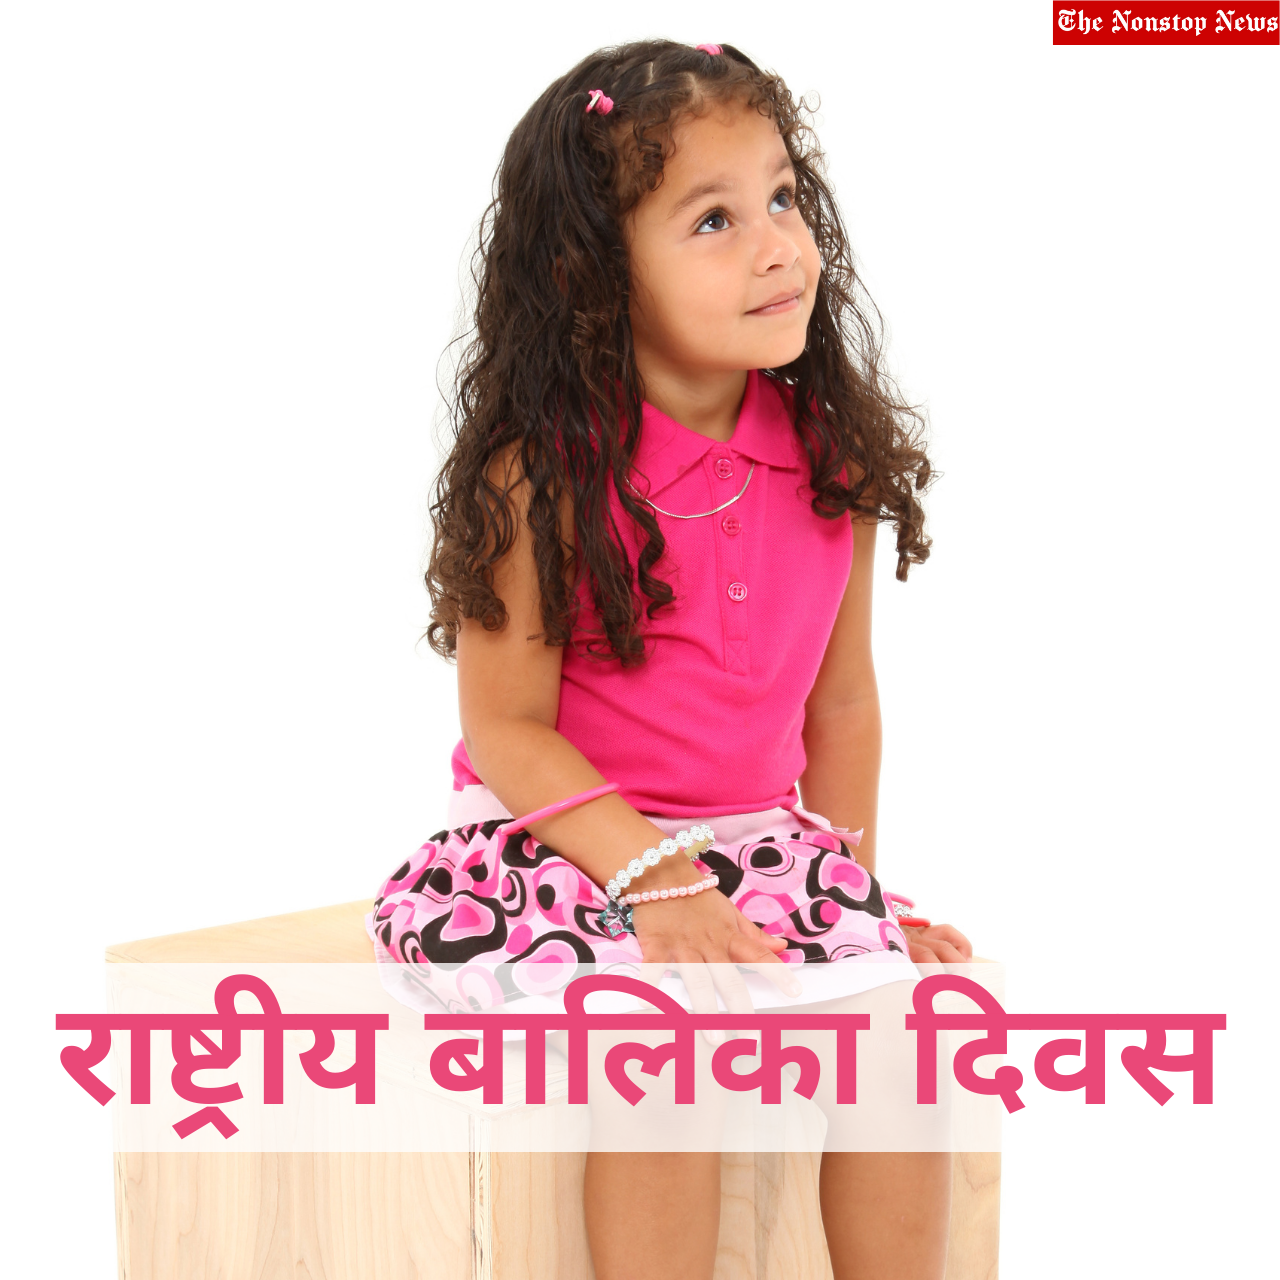 National Girl Child Day 2022: Hindi Quotes, Wishes, HD Images, Messages, Shayari, Status, Greetings to create awareness